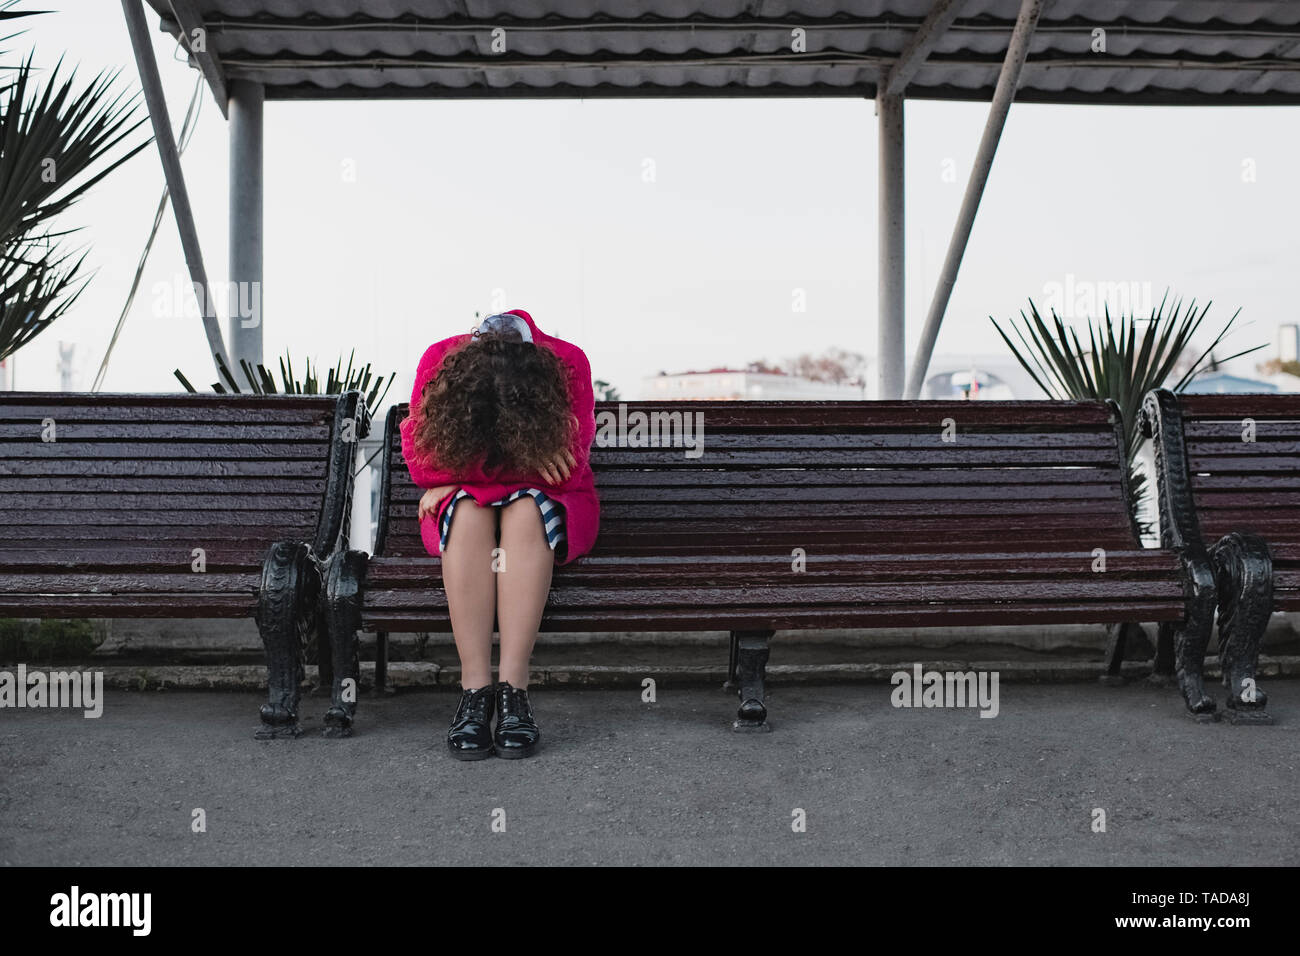 Depressed woman with curly hair sitting on a bench Stock Photo